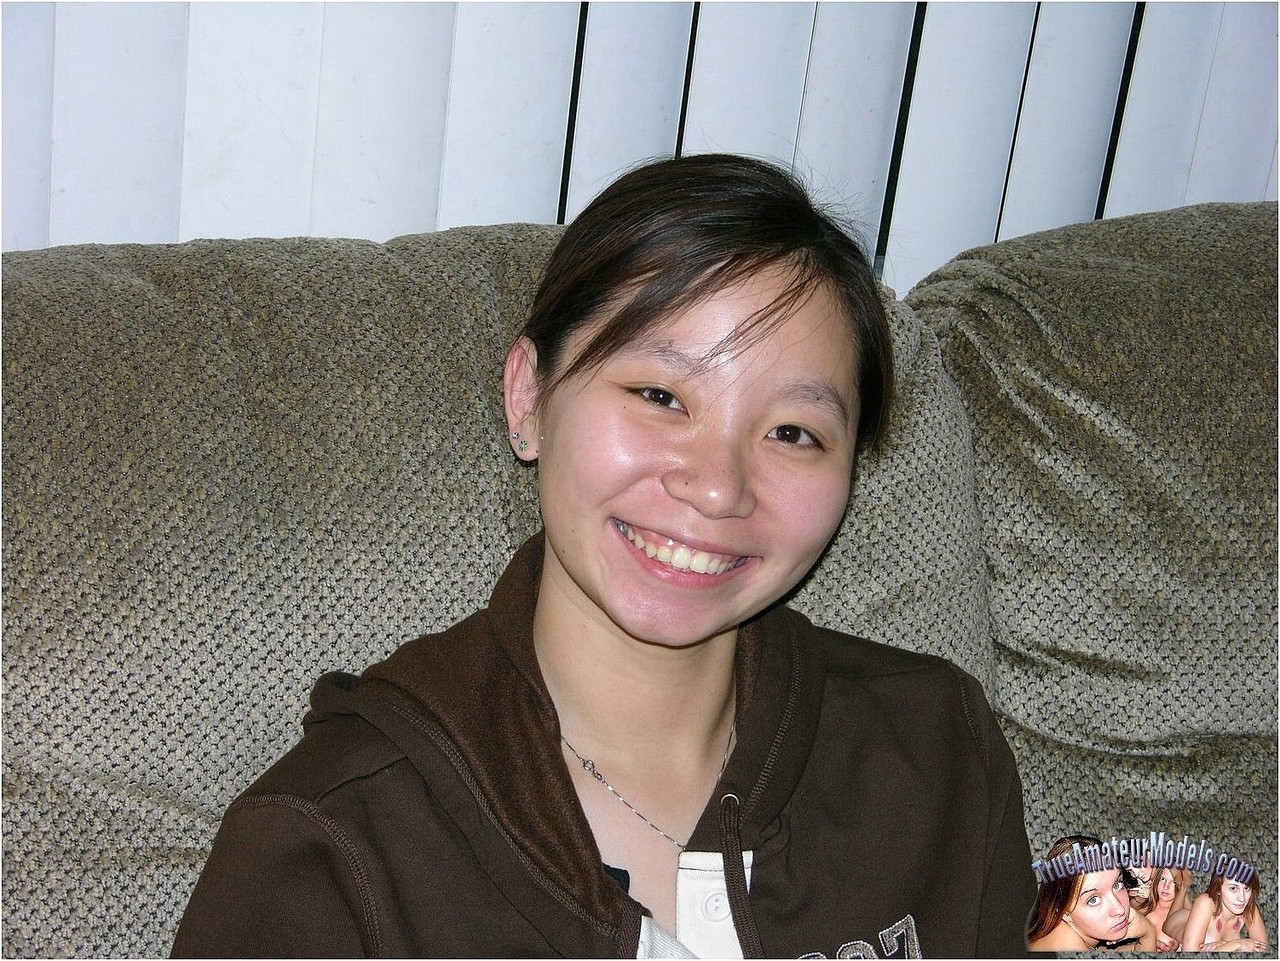 Barely legal Asian girl wears nothing more than a smile while showing her twat foto porno #424574538